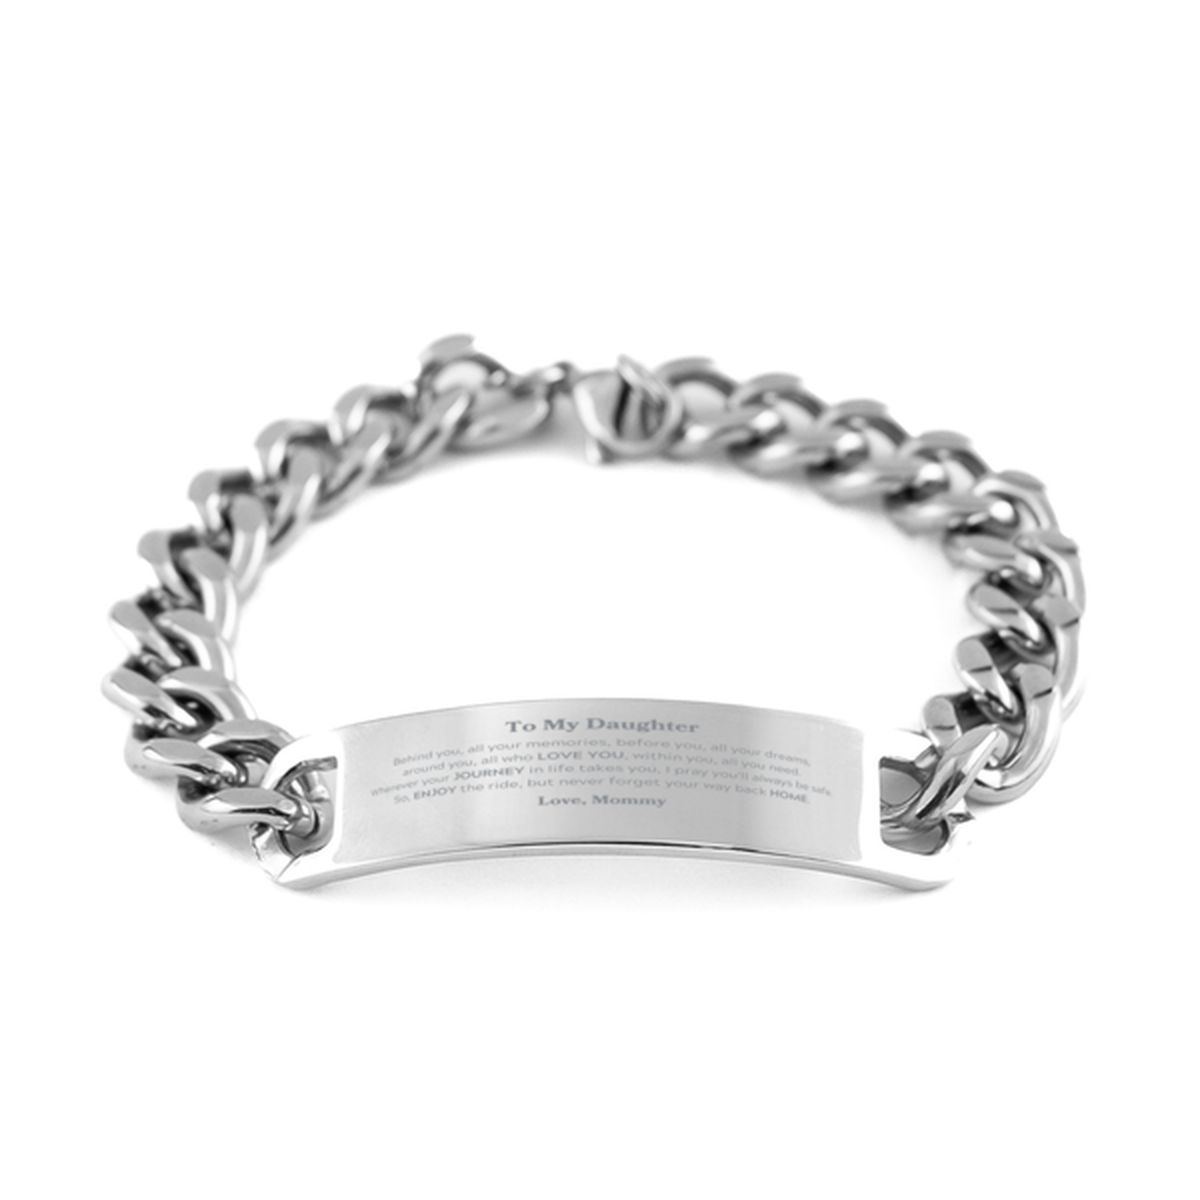 To My Daughter Graduation Gifts from Mommy, Daughter Cuban Chain Stainless Steel Bracelet Christmas Birthday Gifts for Daughter Behind you, all your memories, before you, all your dreams. Love, Mommy